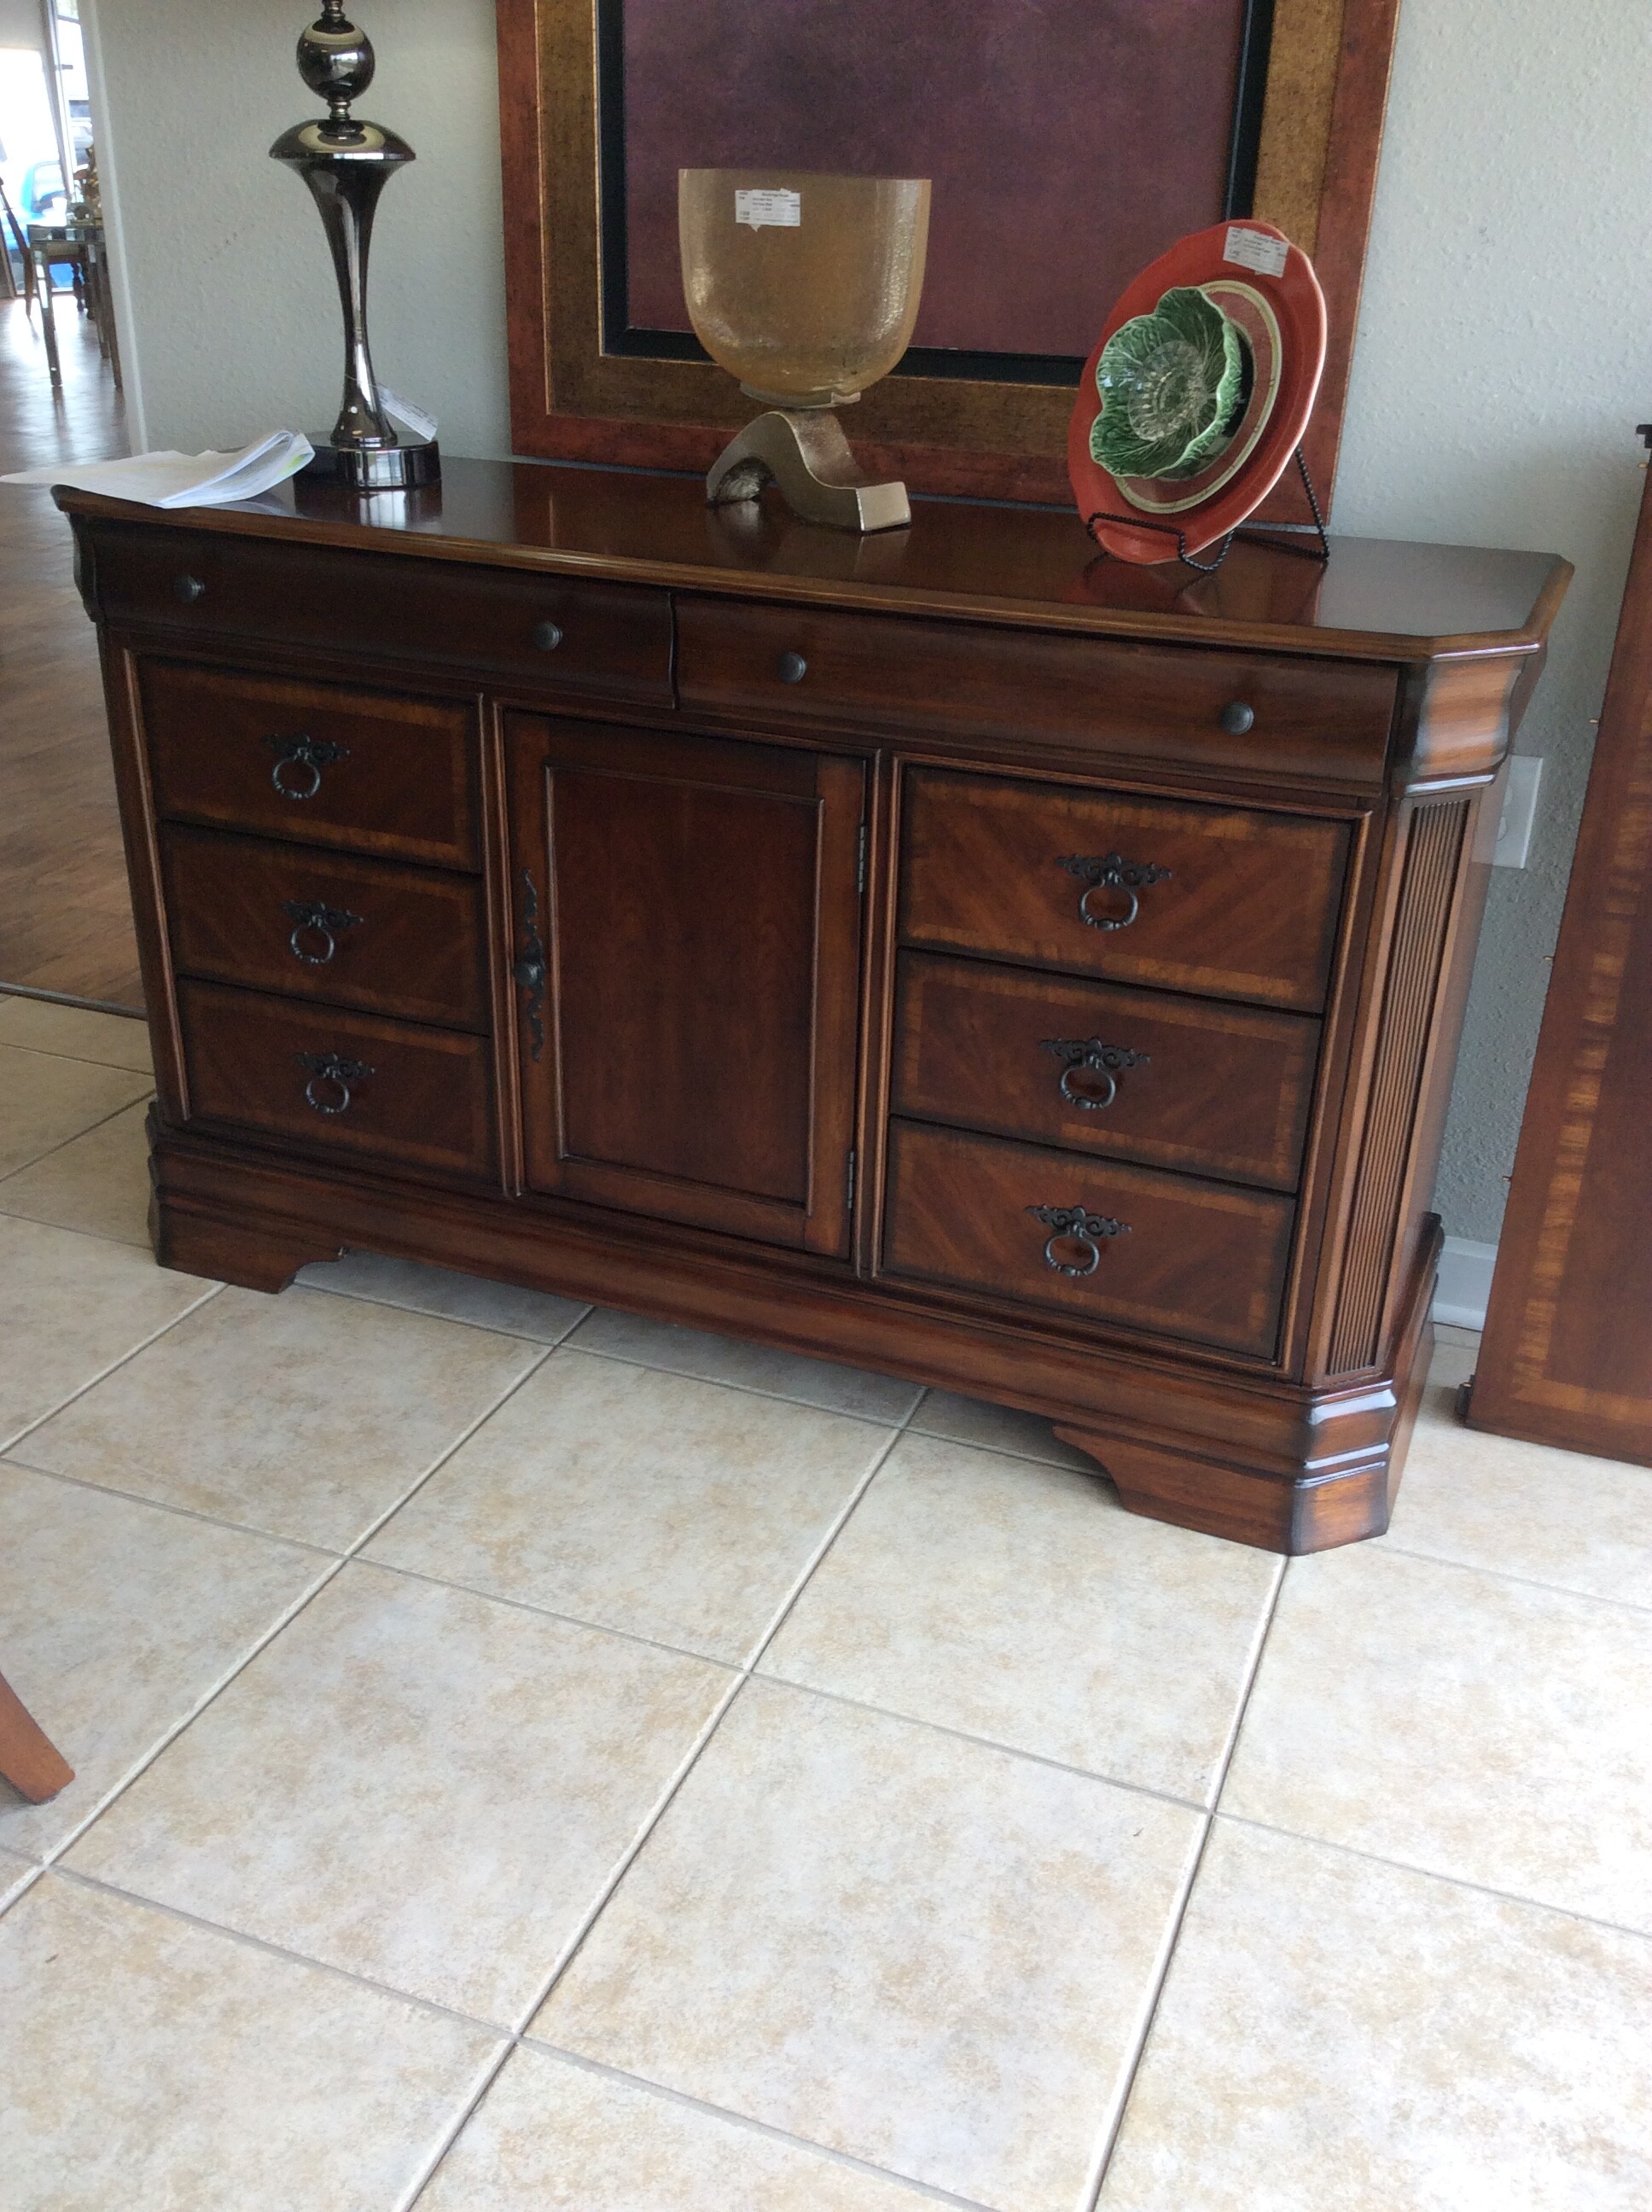 This is a traditional style buffet from Ashley Furniture. It has a cherry finish and beautiful inlaid vaneer details.